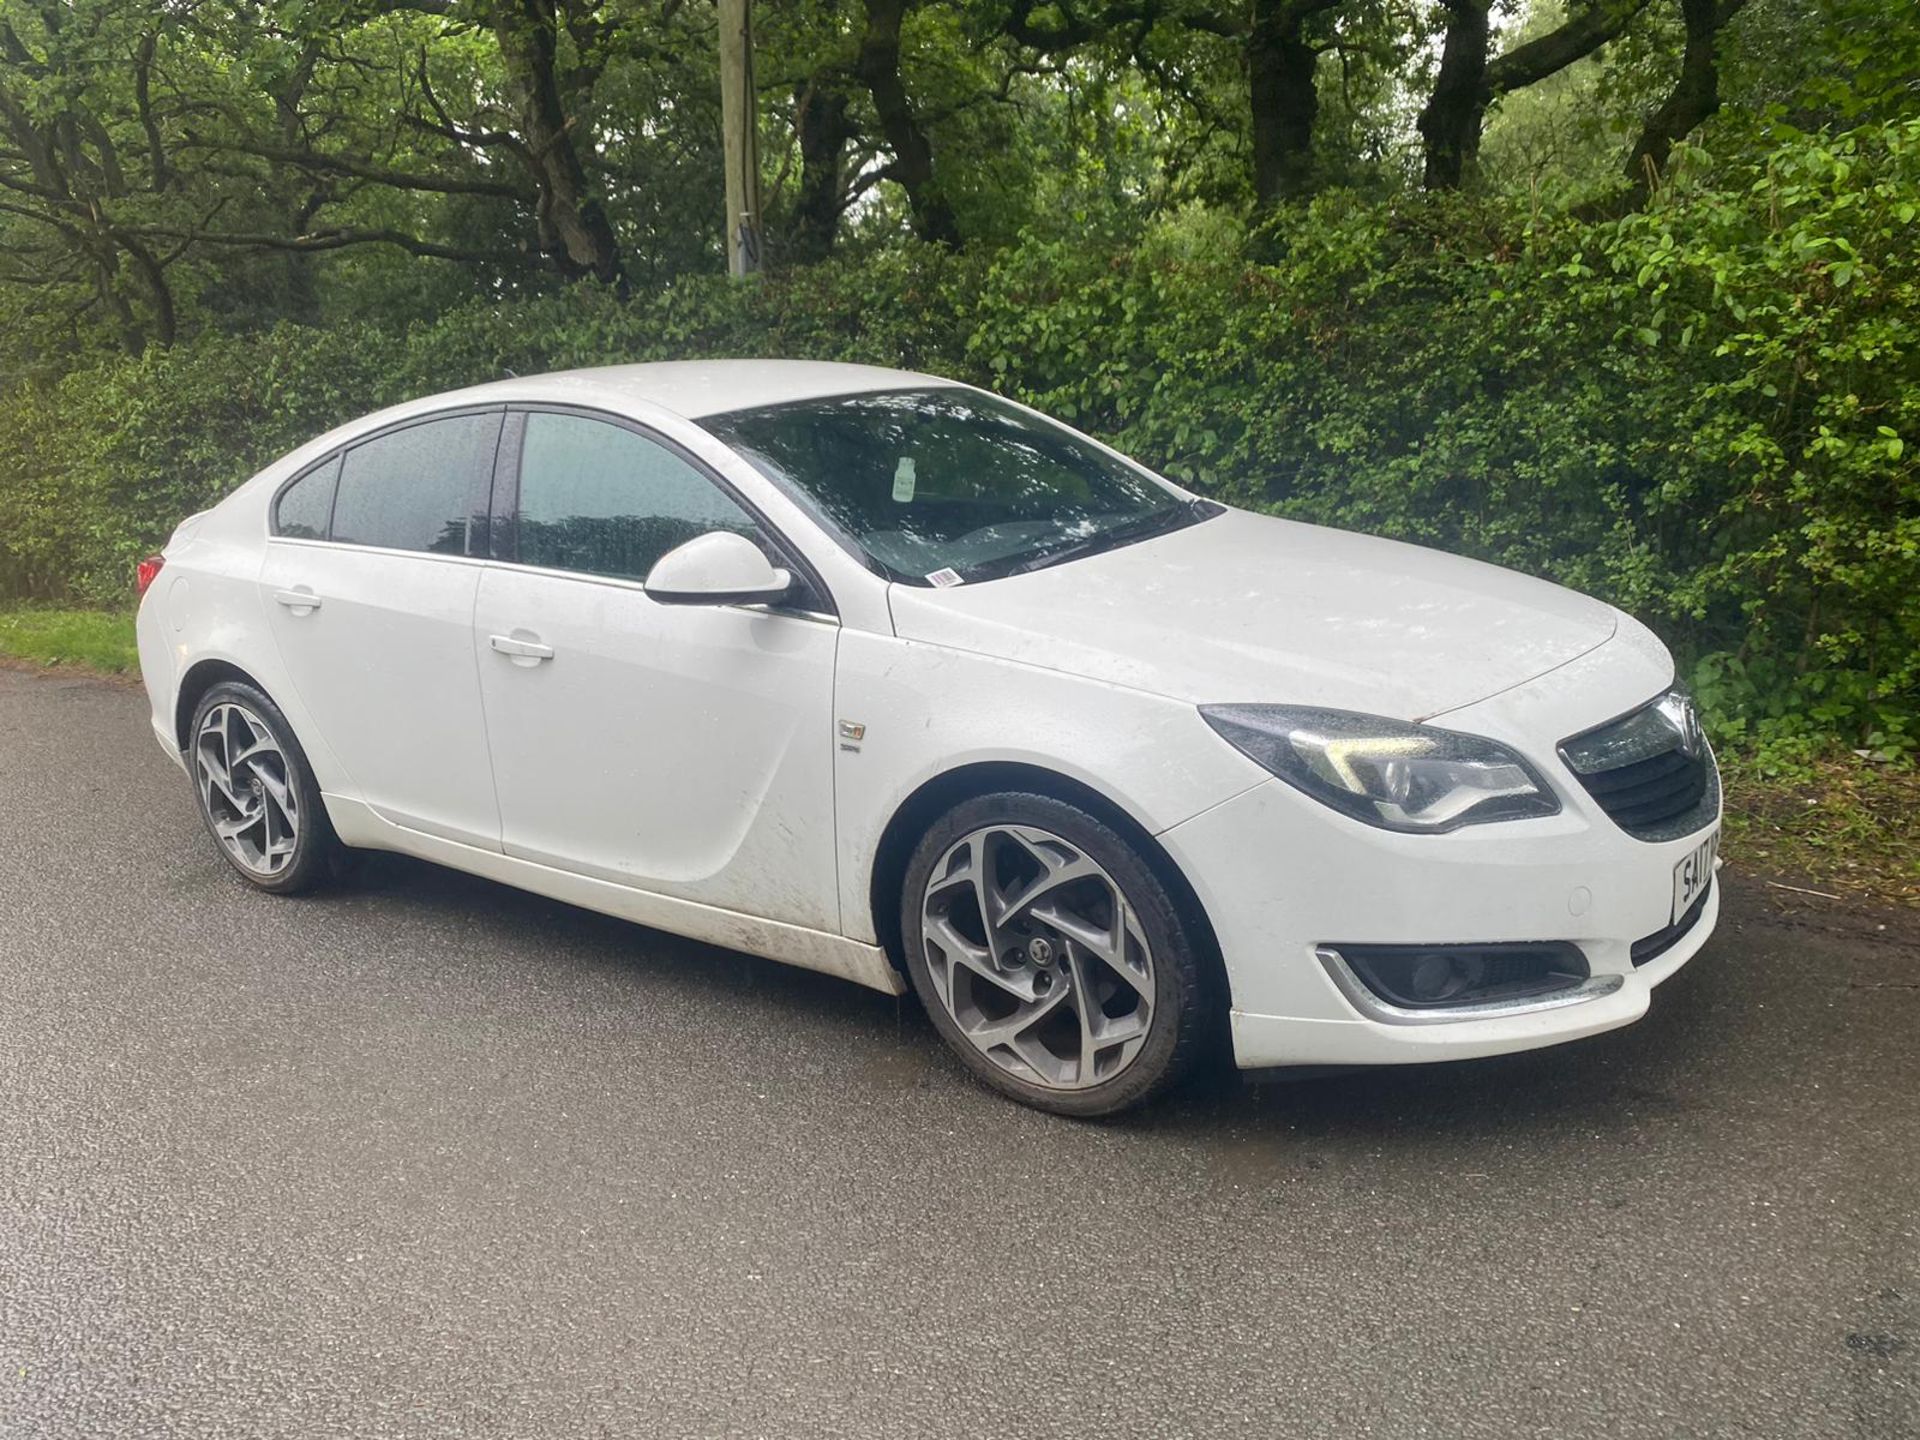 2017 17 VAUXHALL INSIGNIA SRI VX LINE - 94K MILES - AIR CON -  STARTS AND DRIVES